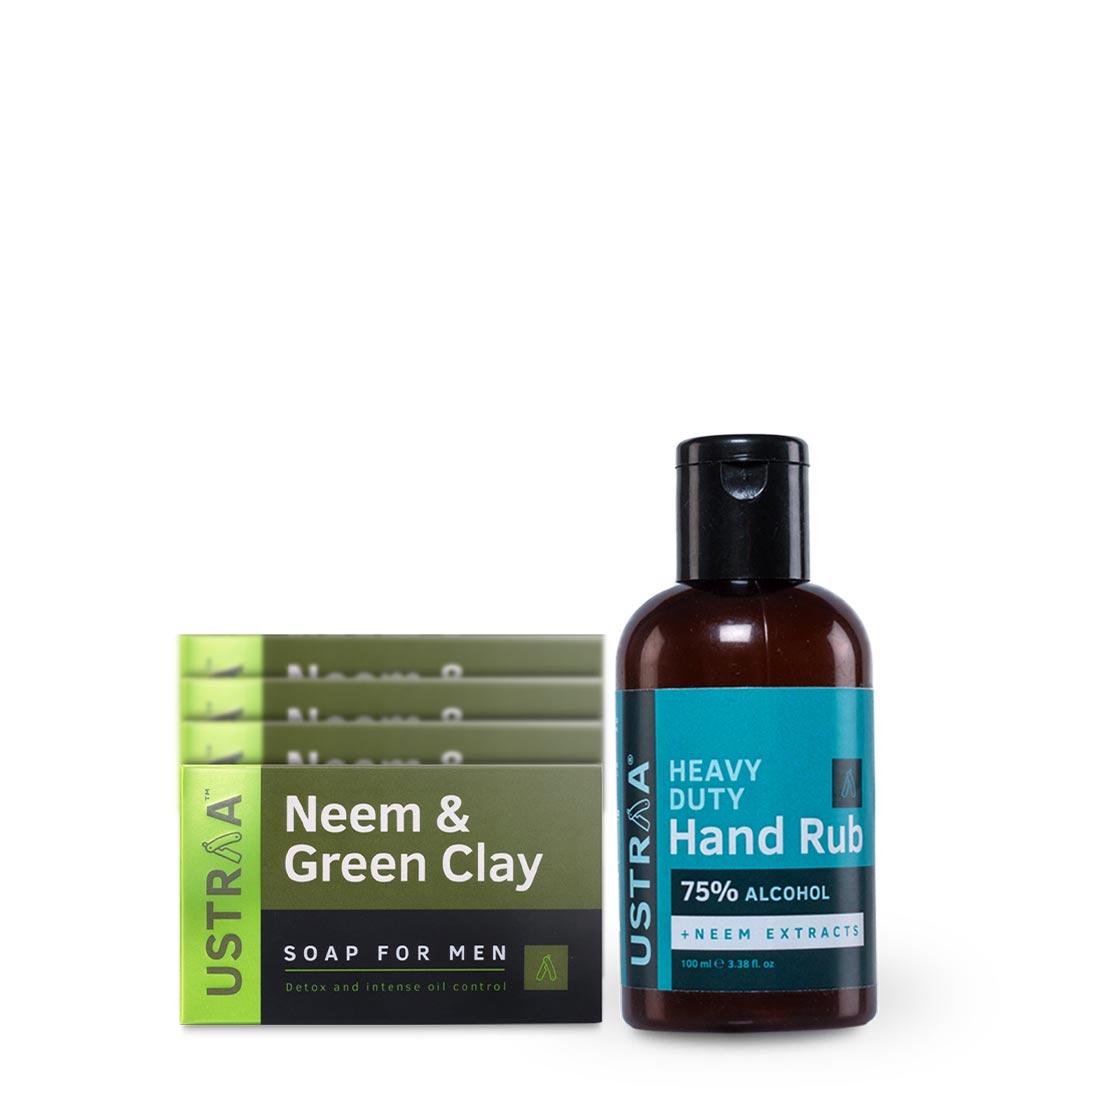 Deo Soap - Neem & Green Clay- Pack of 4 & Hand Rub